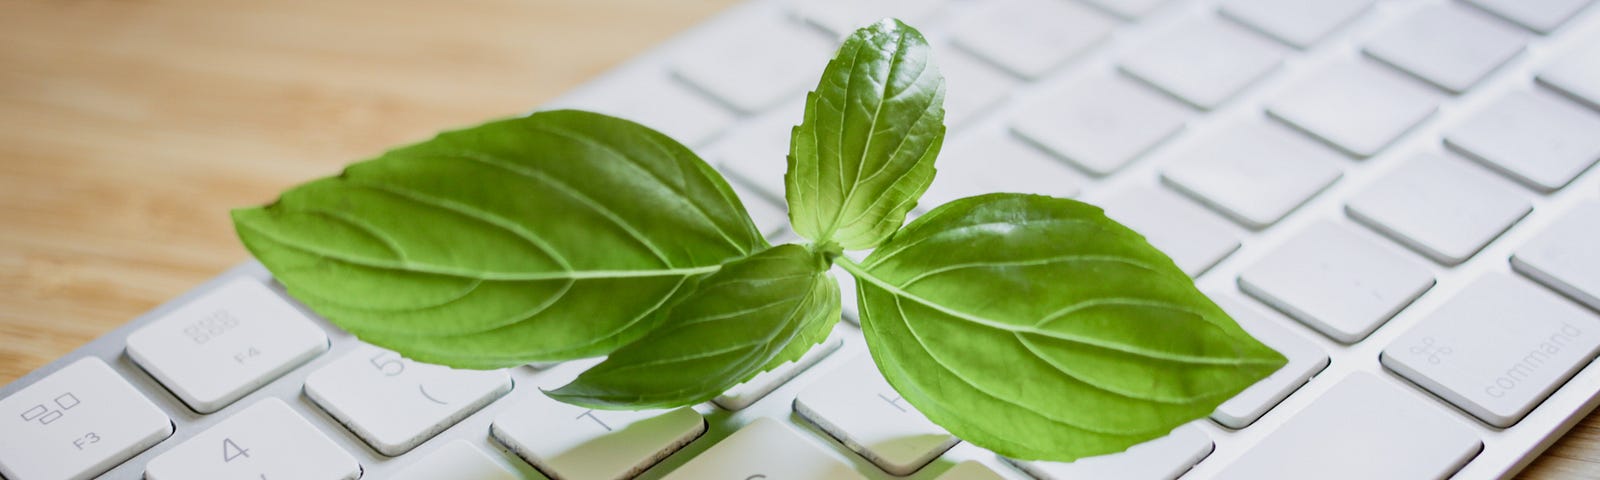 An image of a plant growing out of a keyboard